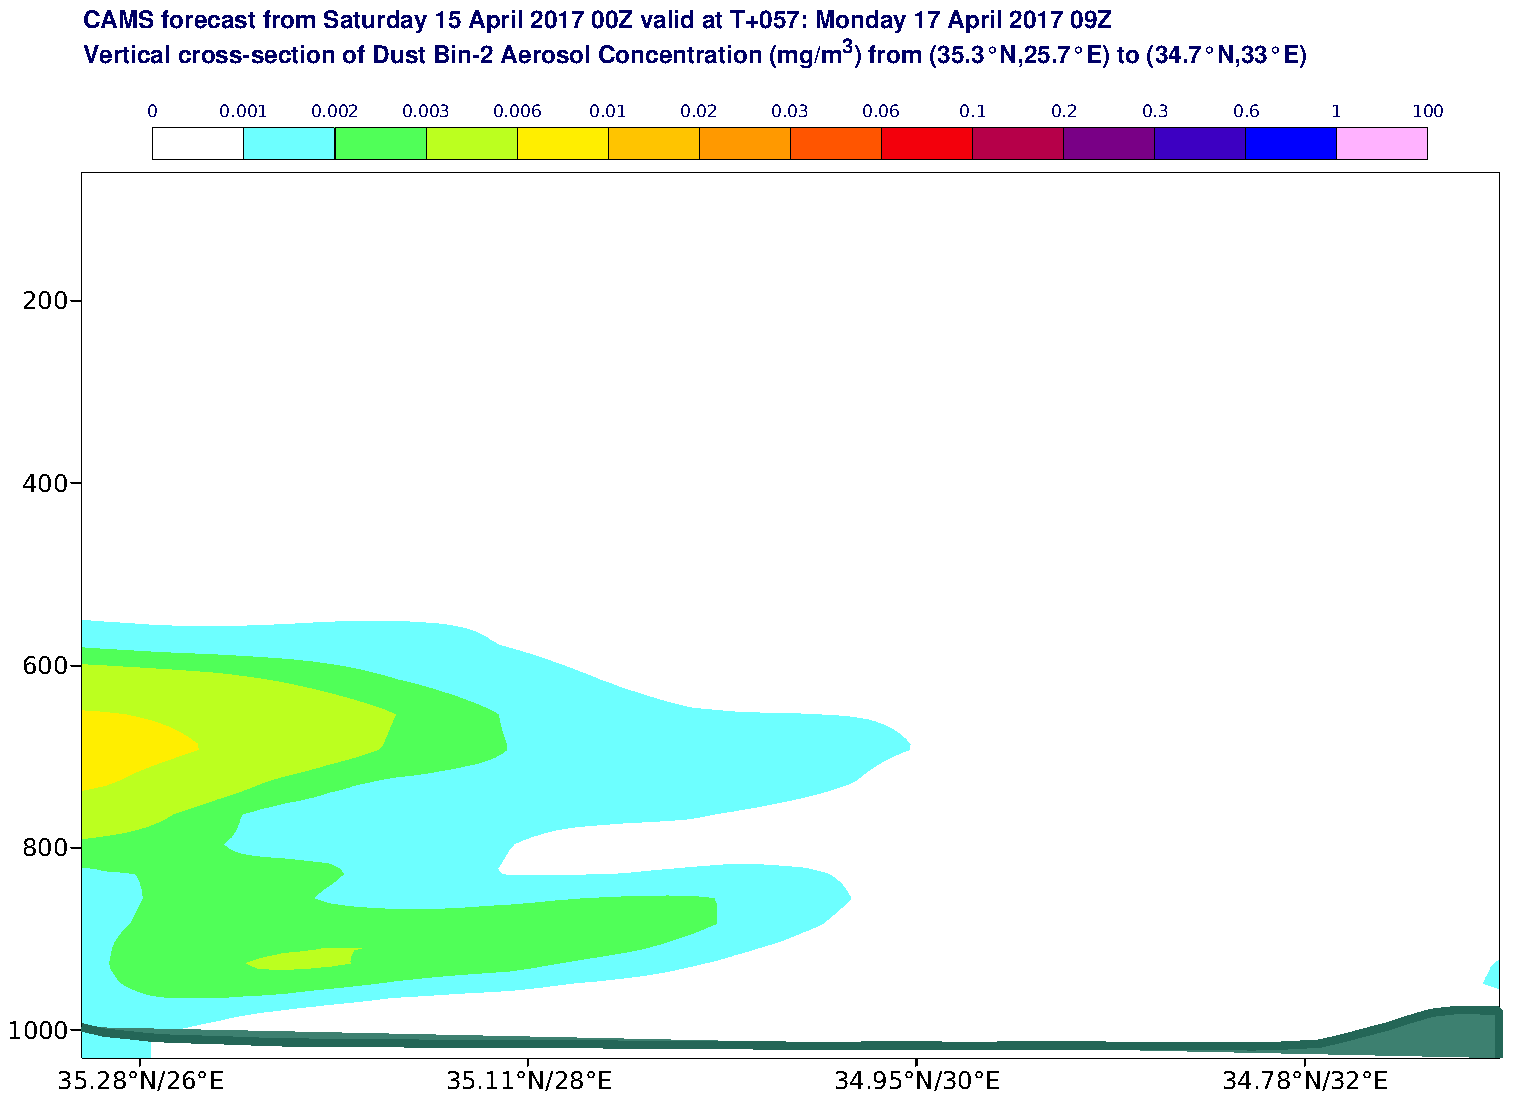 Vertical cross-section of Dust Bin-2 Aerosol Concentration (mg/m3) valid at T57 - 2017-04-17 09:00